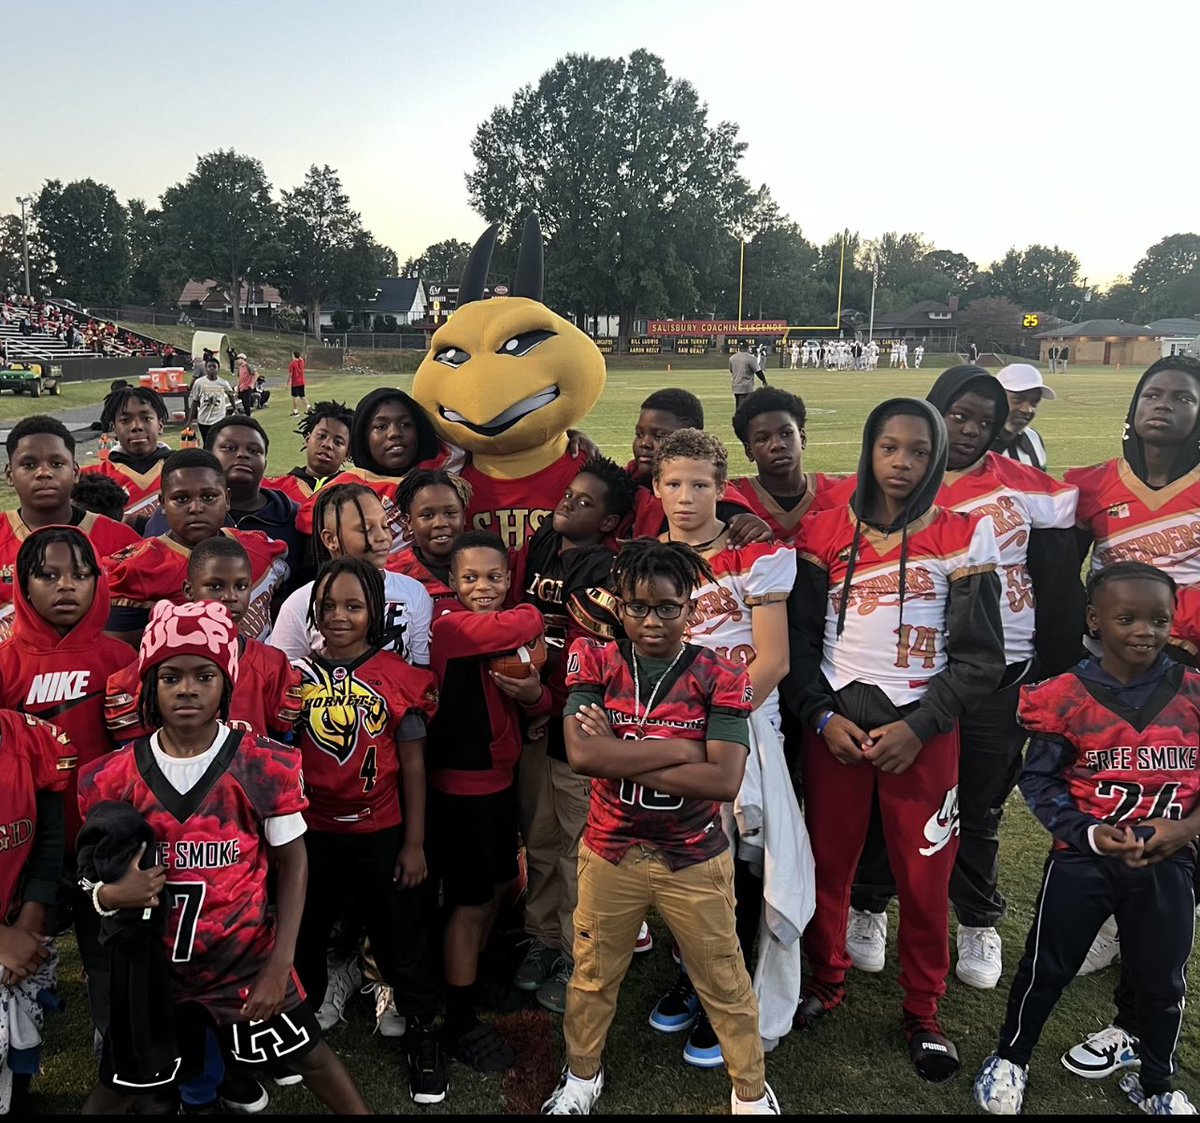 Thank you @SHS_Hornets for allowing us to celebrate homecoming with you! We had an amazing time. Go Hornets! #strongertogether 56-6 W! Thank you Principal Marvin Moore for sharing your wisdom with our student-athletes! @mikelondonpost3